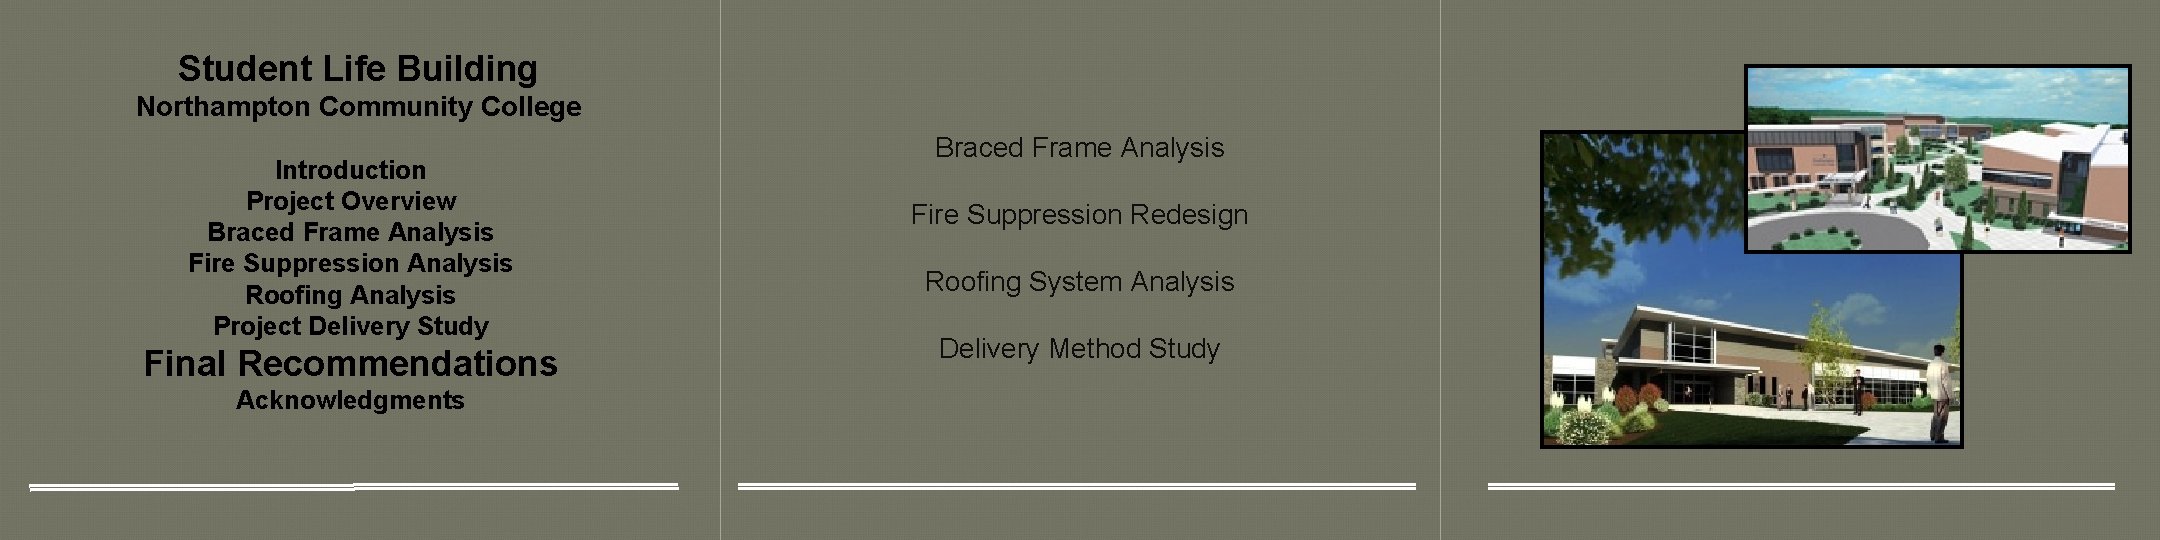 Student Life Building Northampton Community College Introduction Project Overview Braced Frame Analysis Fire Suppression